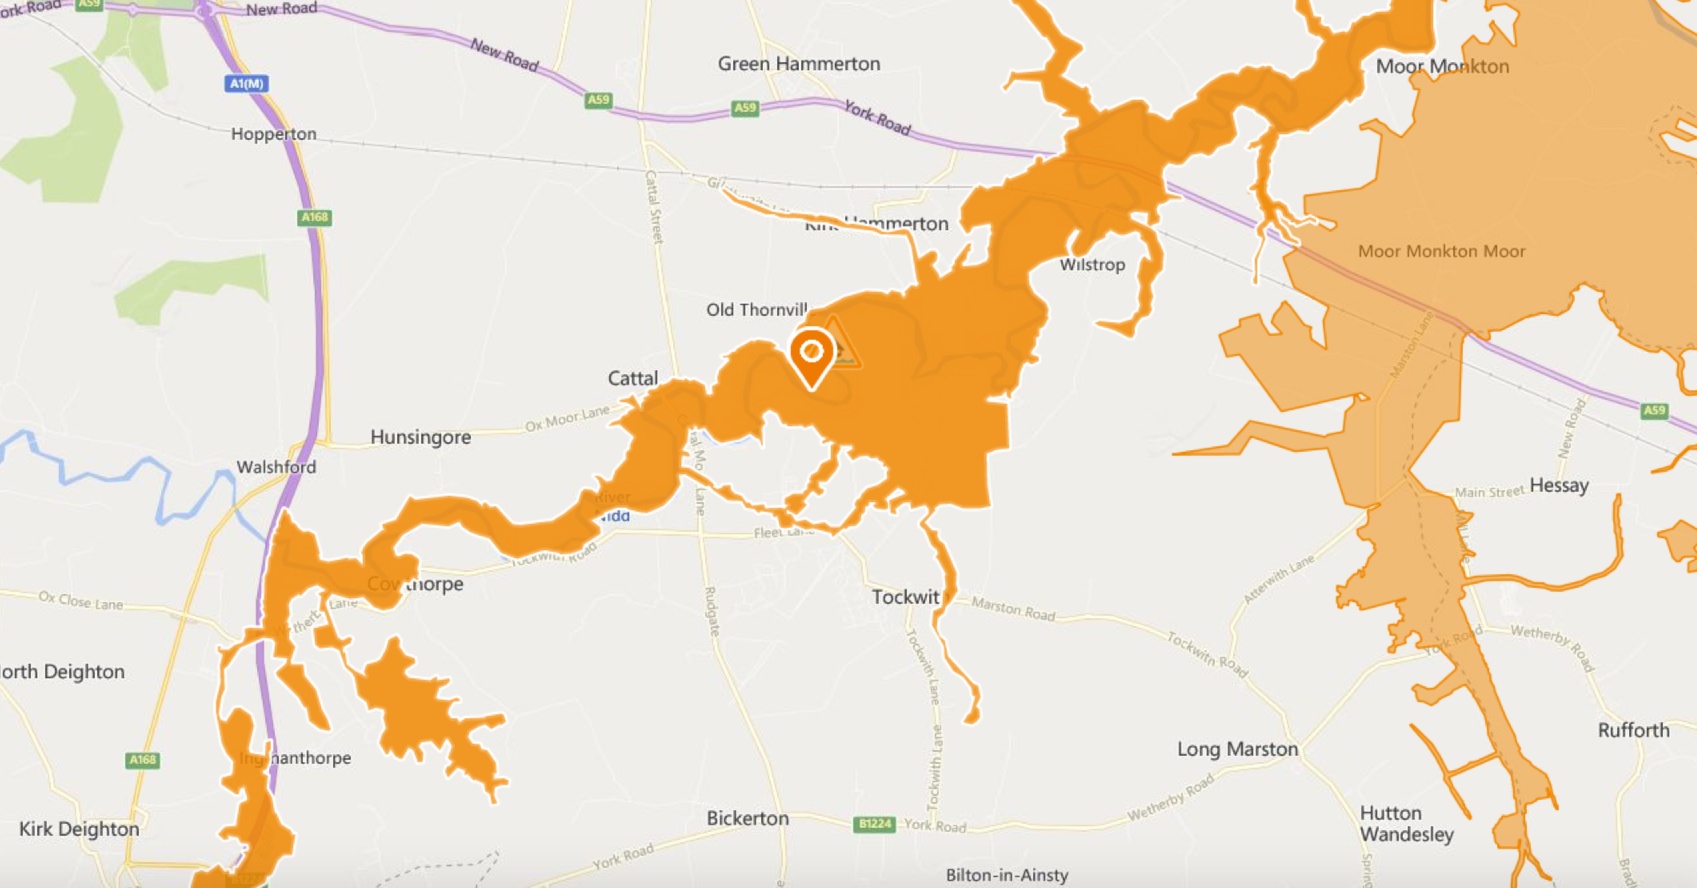 Environment Agency flood alerts for the lower River Nidd